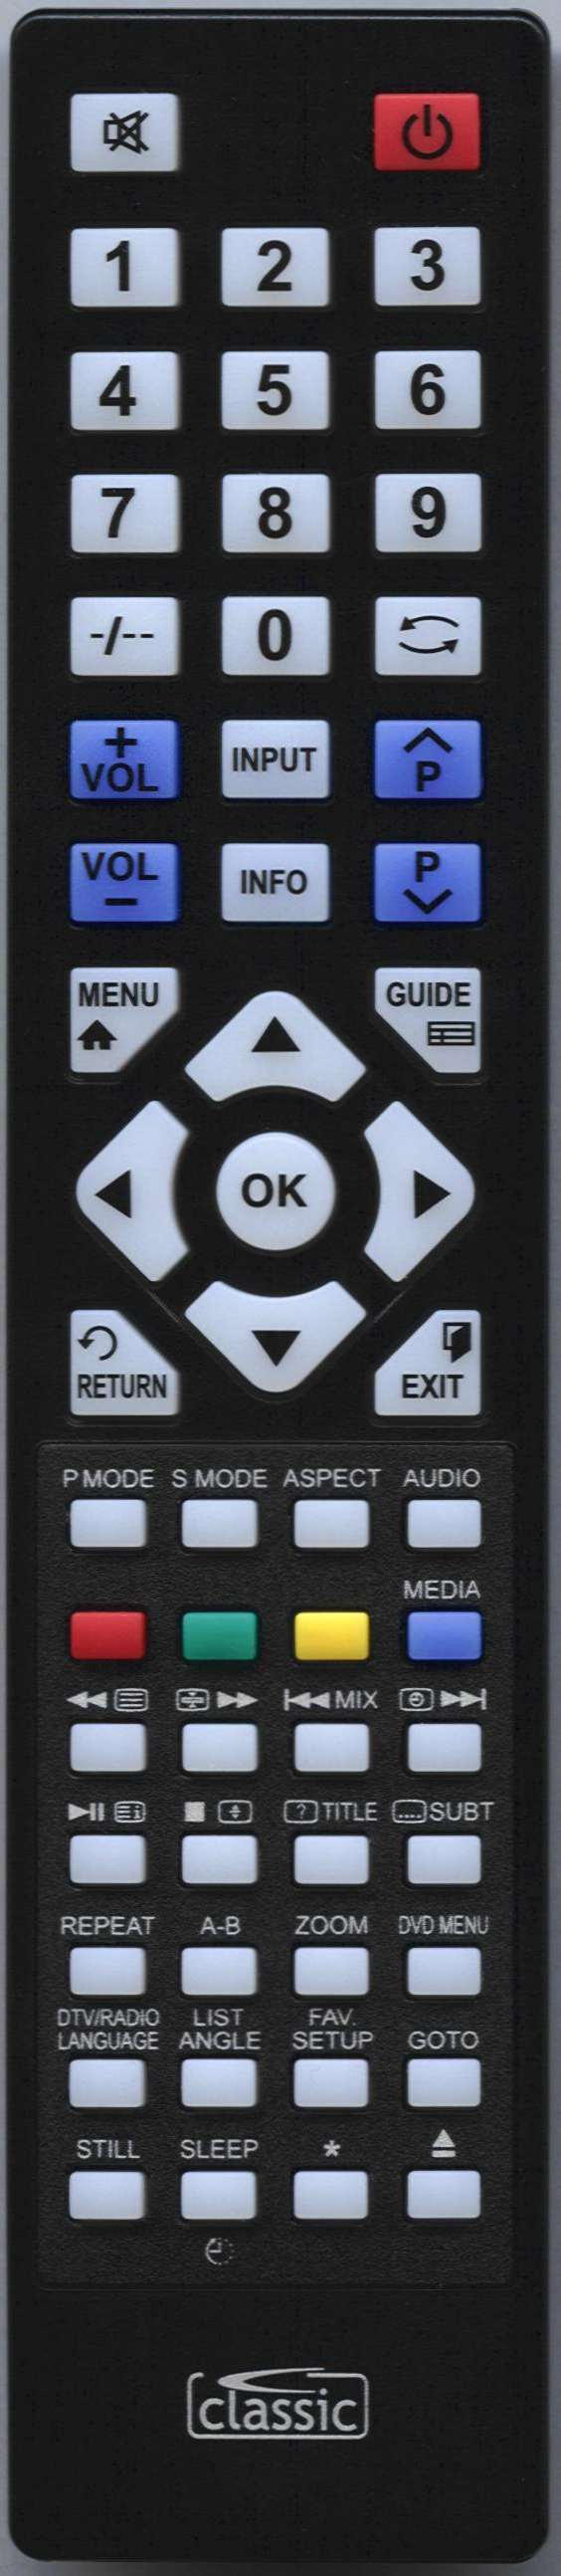 JVC RM-C 1984 Replacement Remote Control